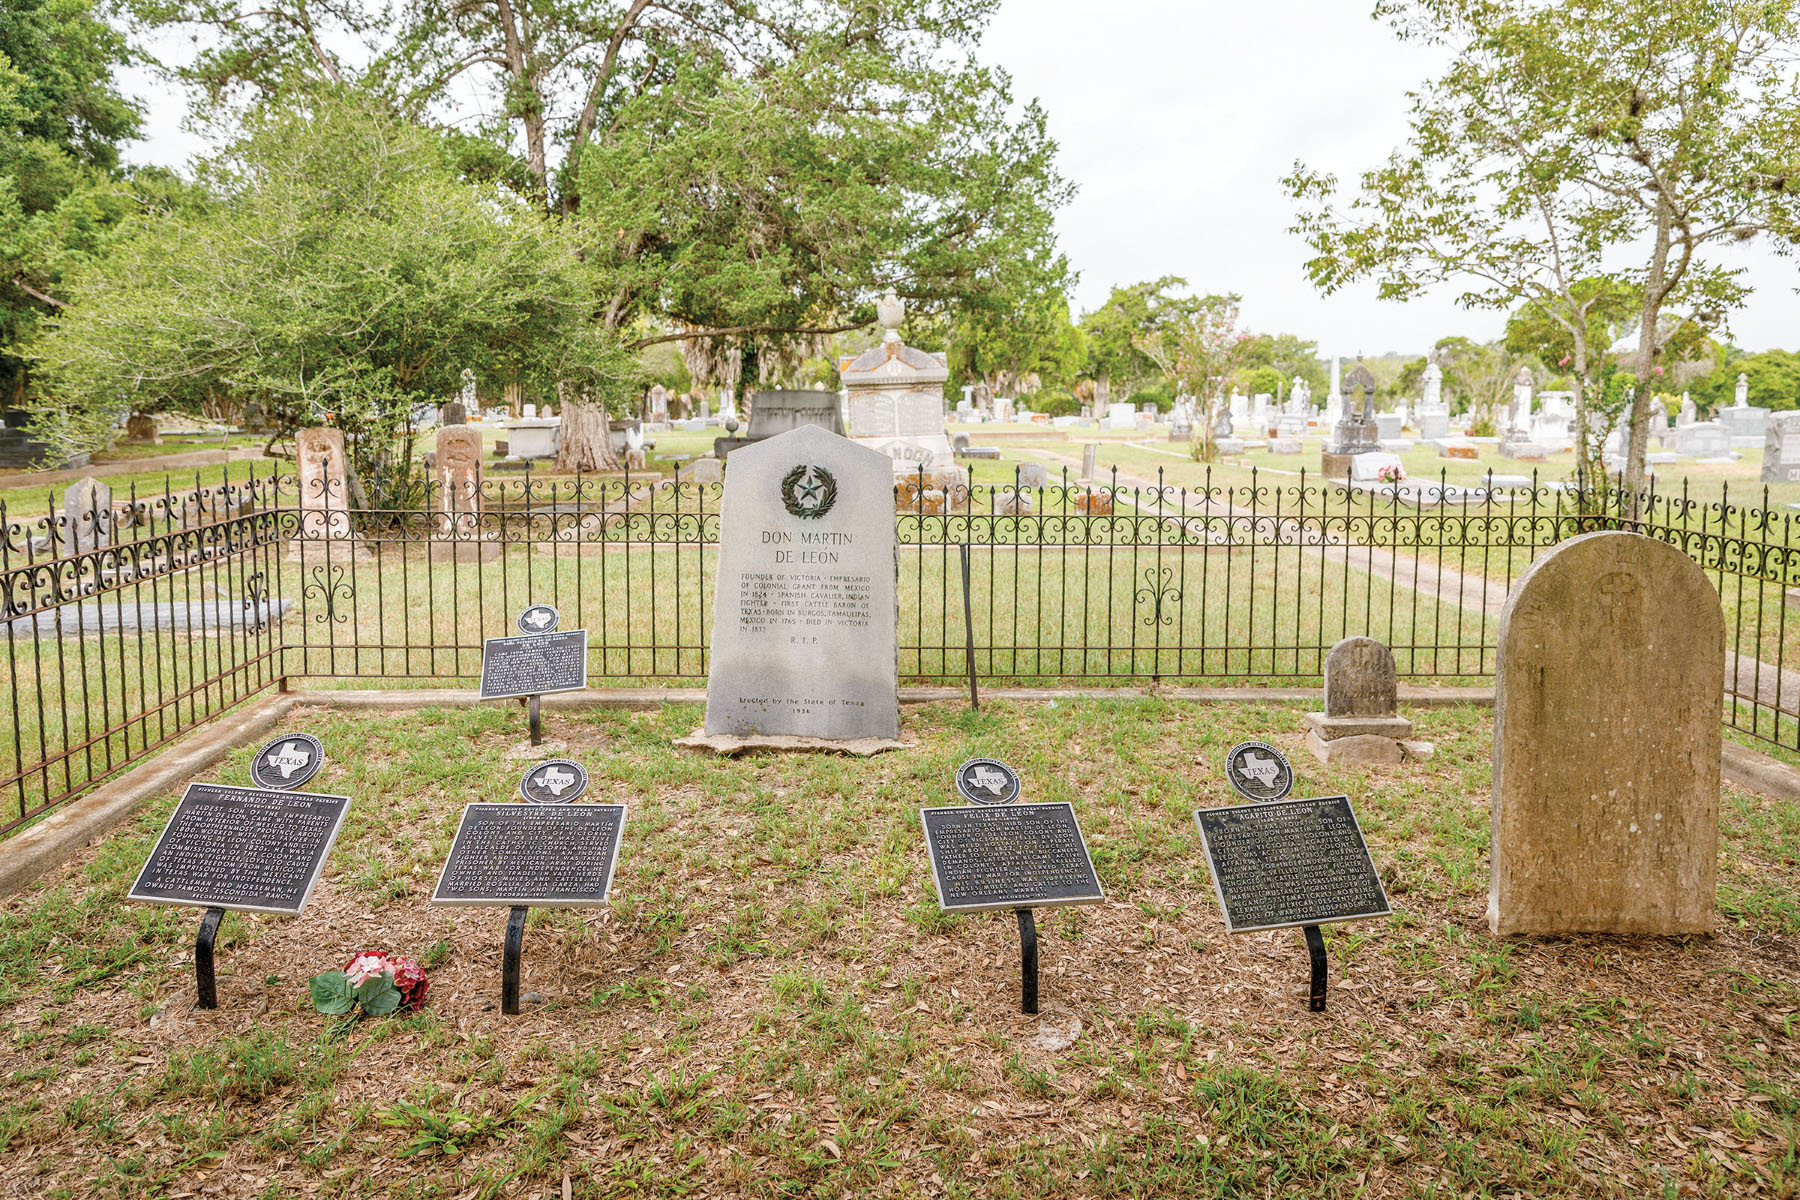 A cemetary with several black plaques and concrete headstones